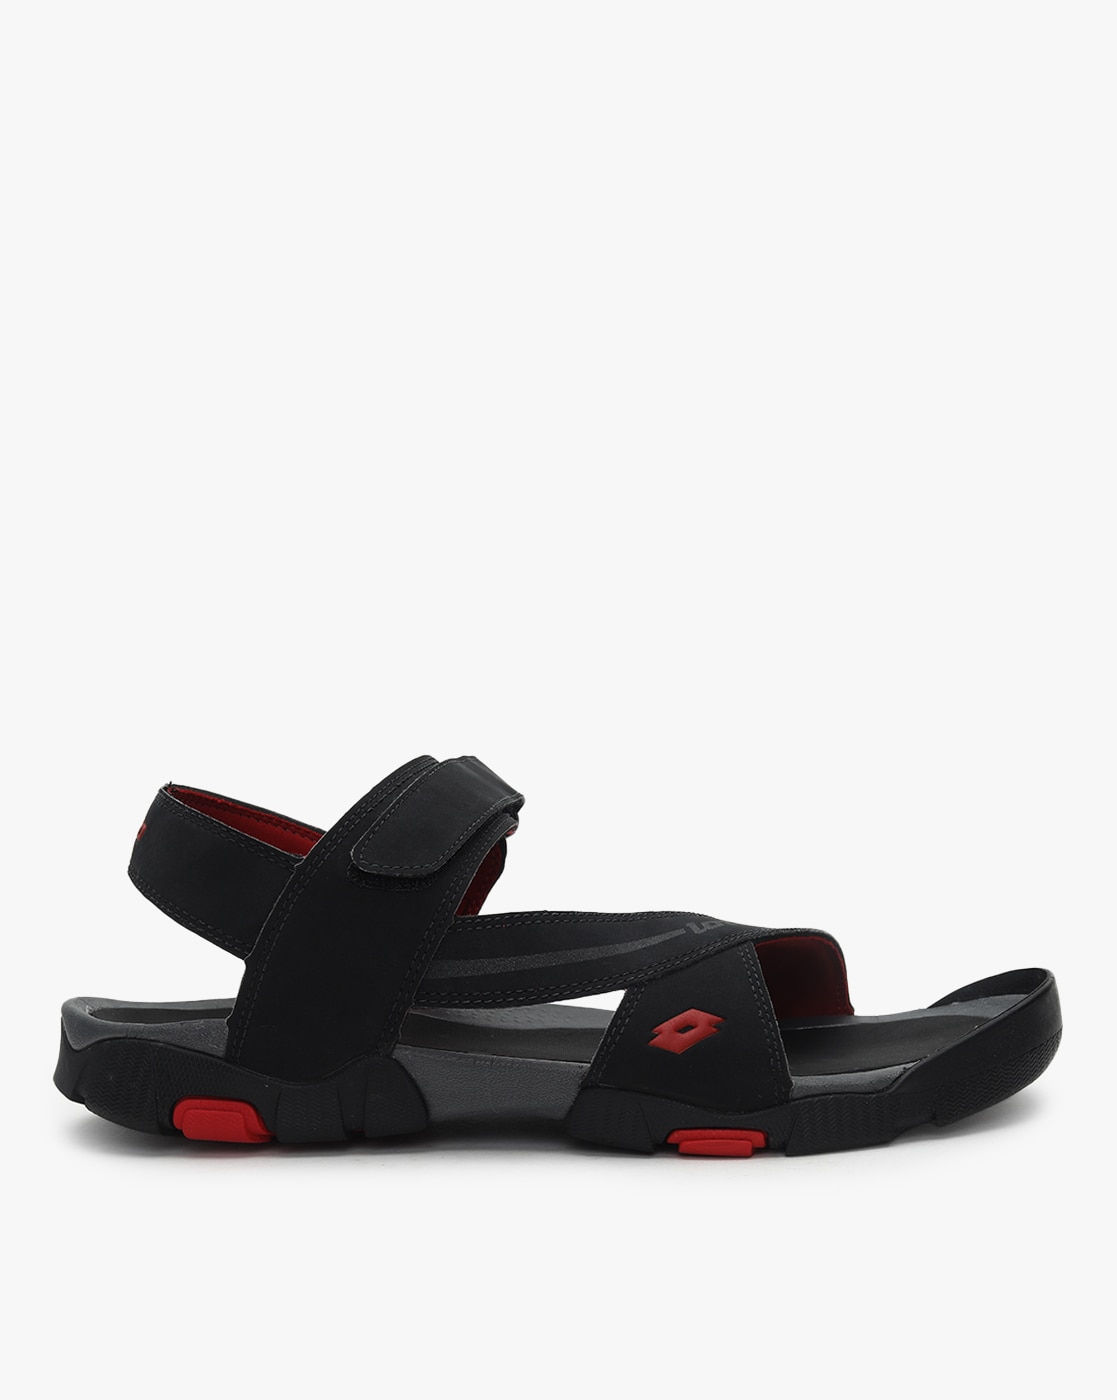 Buy Black & Blue Sports Sandals for Men by LOTTO Online | Ajio.com